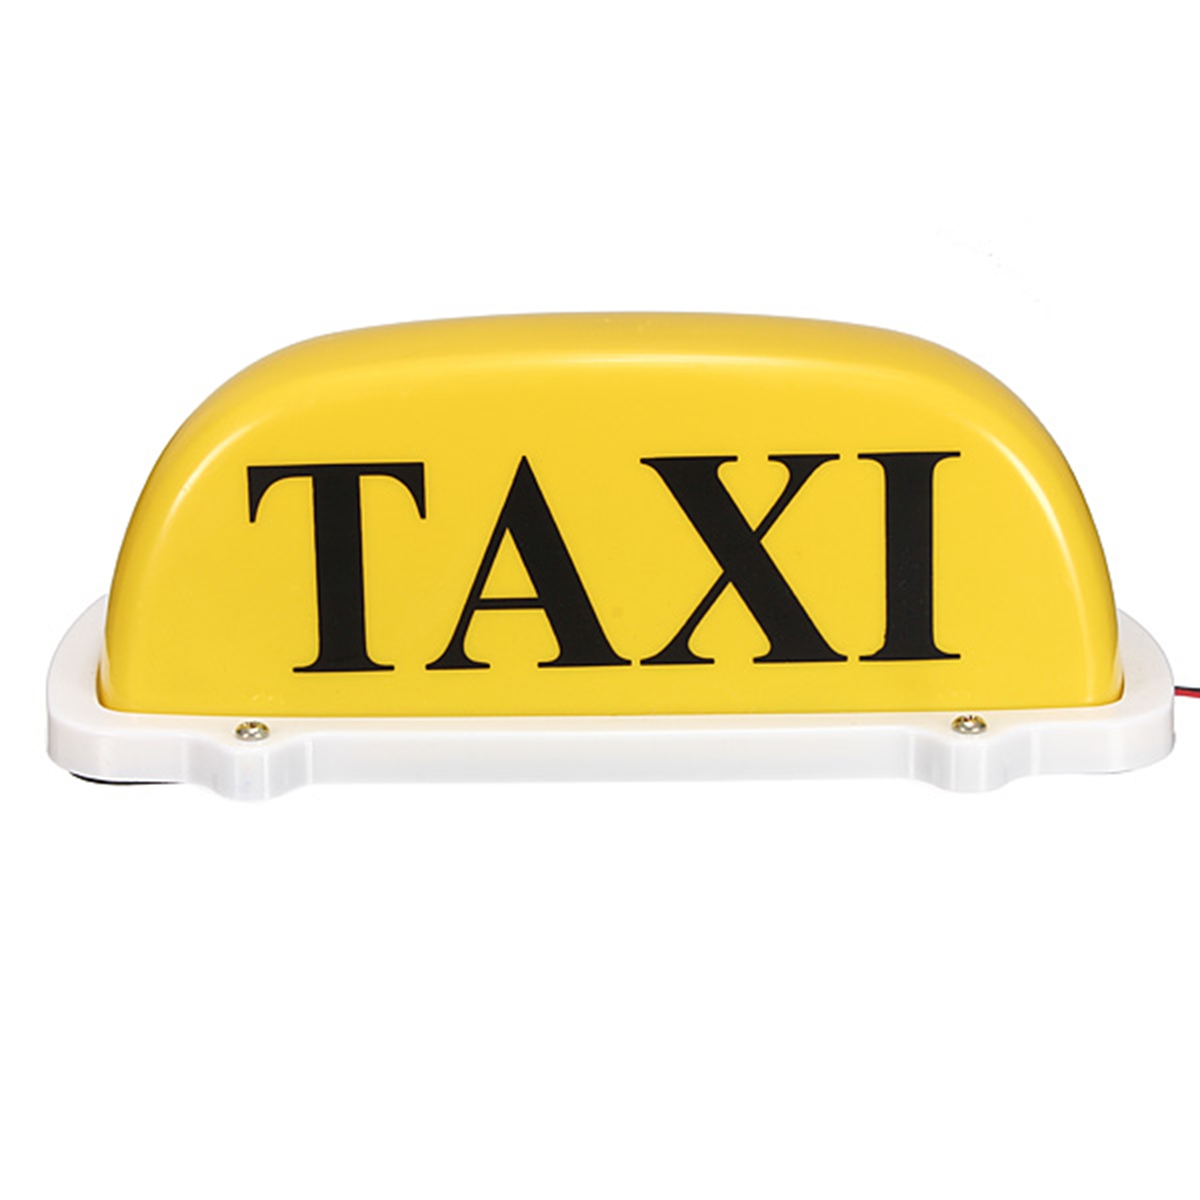 DC12V-Car-Taxi-Cab-Roof-Top-Sign-Light-Lamp-Magnetic-Yellow-Large-Size-1004593